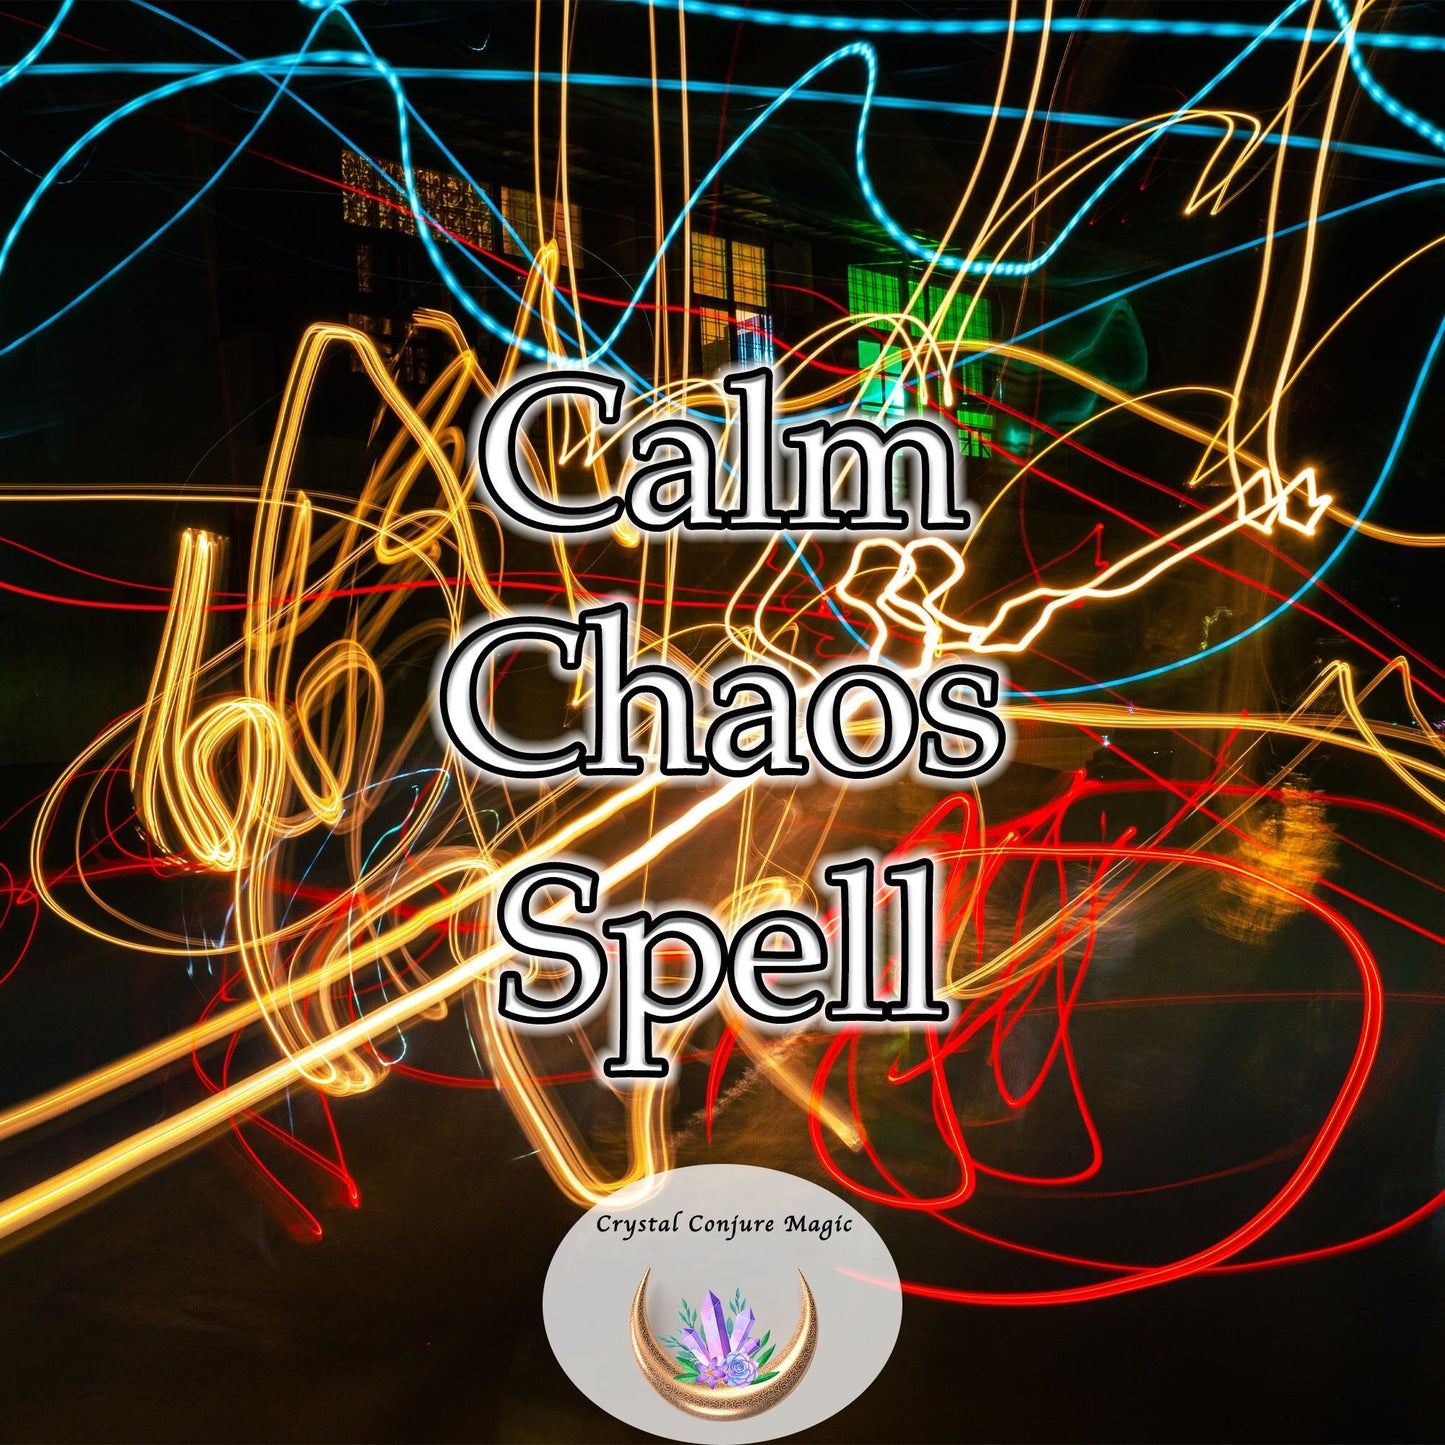 Calm Chaos Spell - mollify life's uproar, offering you the sanctuary of tranquility amidst the turmoil